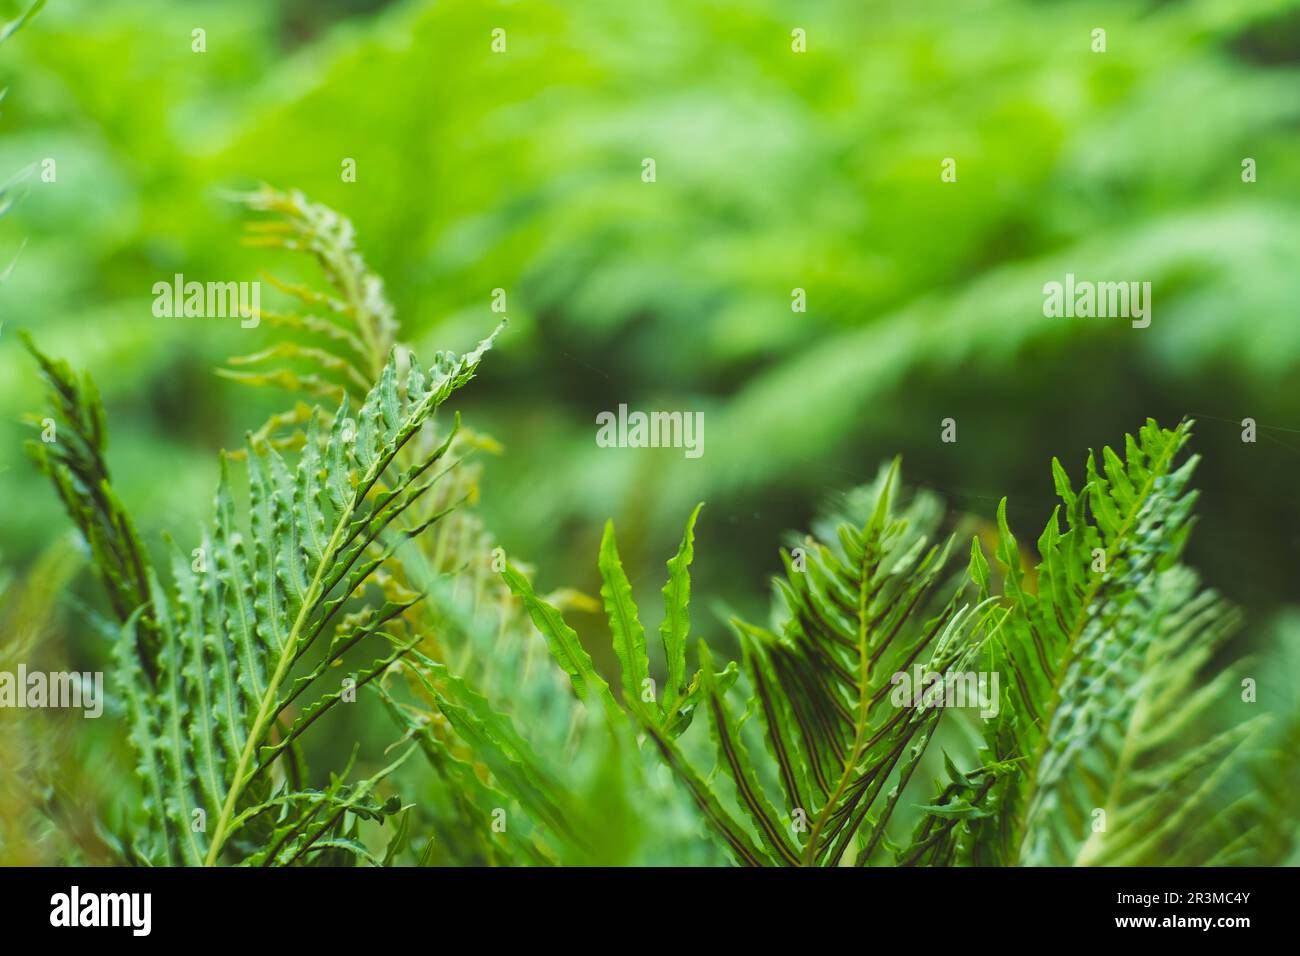 Natural green fern pattern. Fern leaf background. Close up of a fern in a greenhouse. Stock Photo